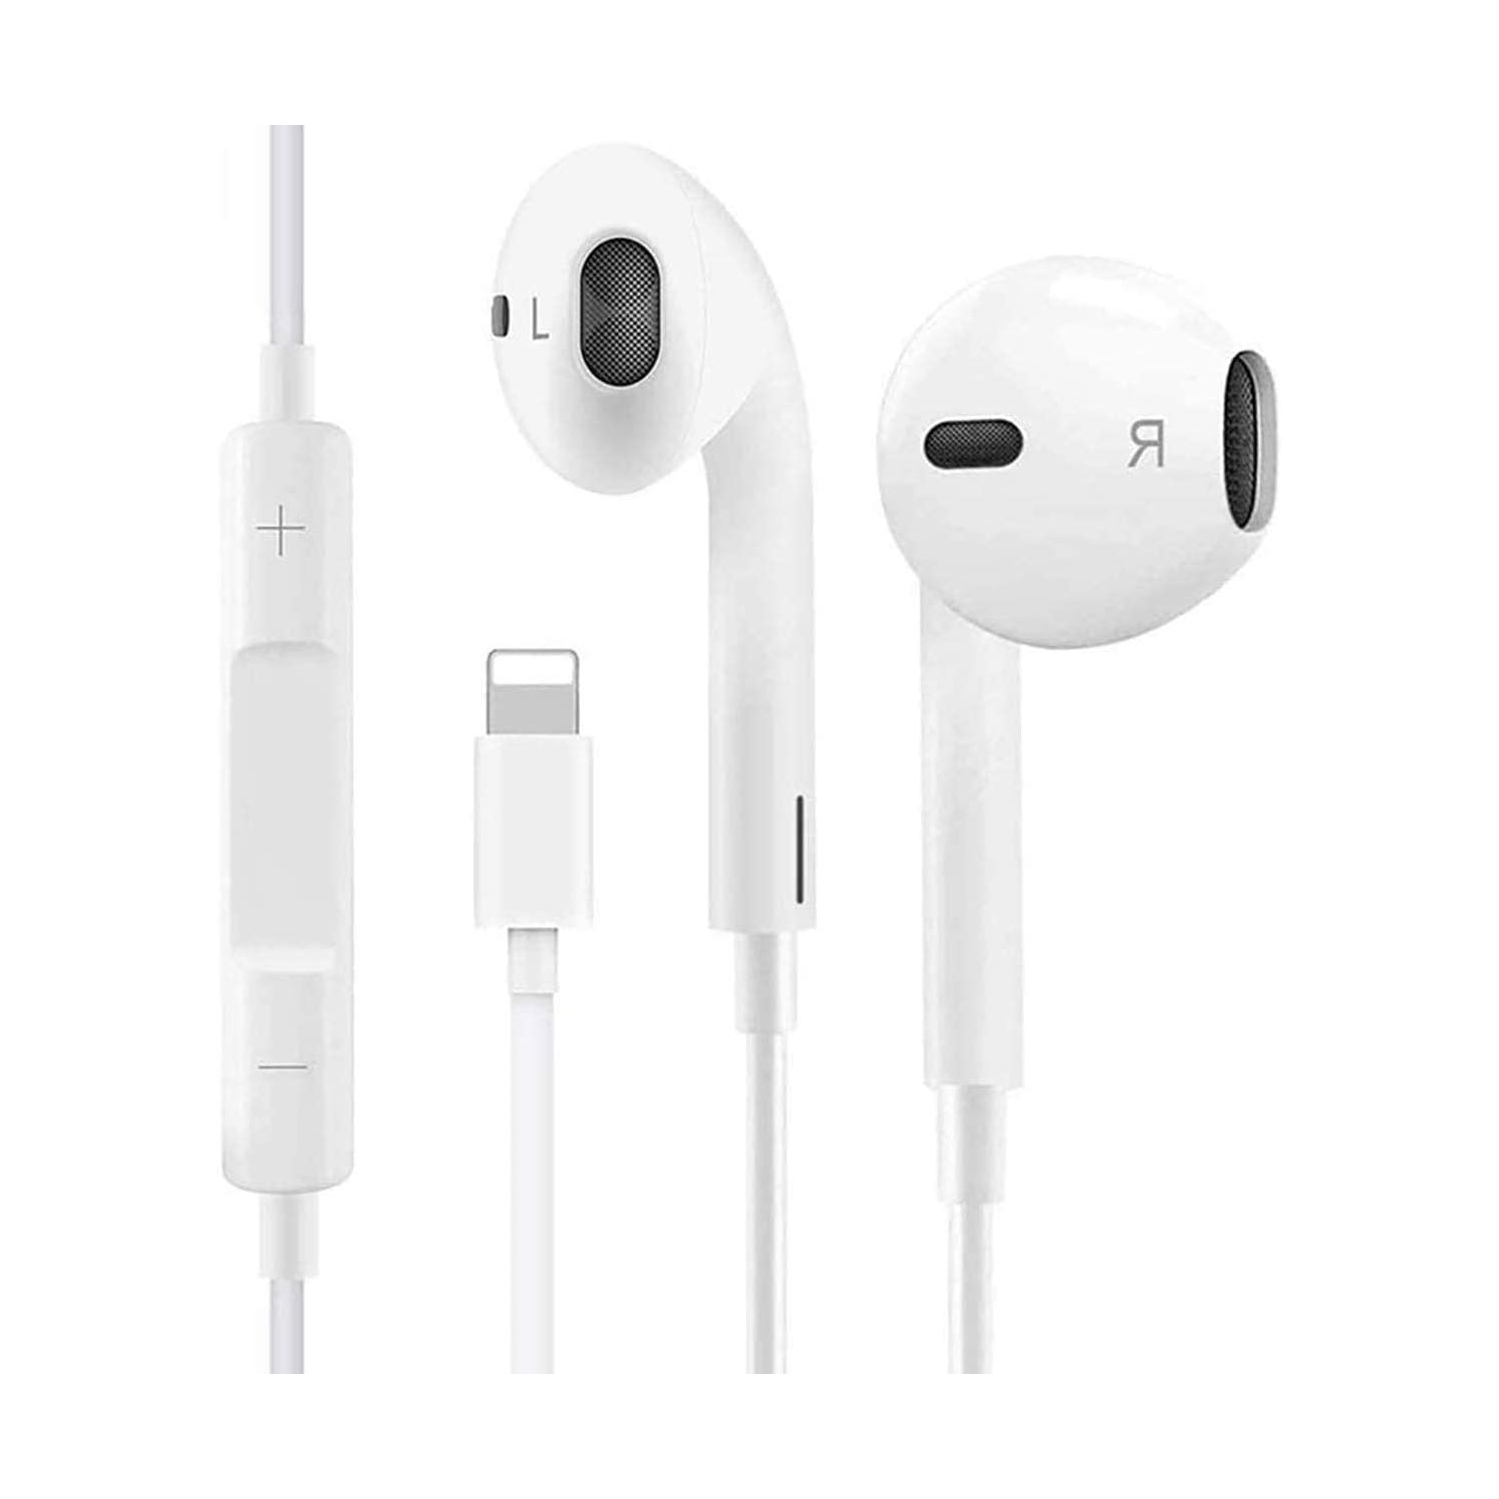 (CABLESHARK)Apple/iPhone Compatible Earbuds/Headphones/Earphones Wired in-Ear Headphones Wired Earbud with Microphone Compatible with iPhone 7 8 Plus X 11 12 13 Pro Max(FREE SHIPPING)